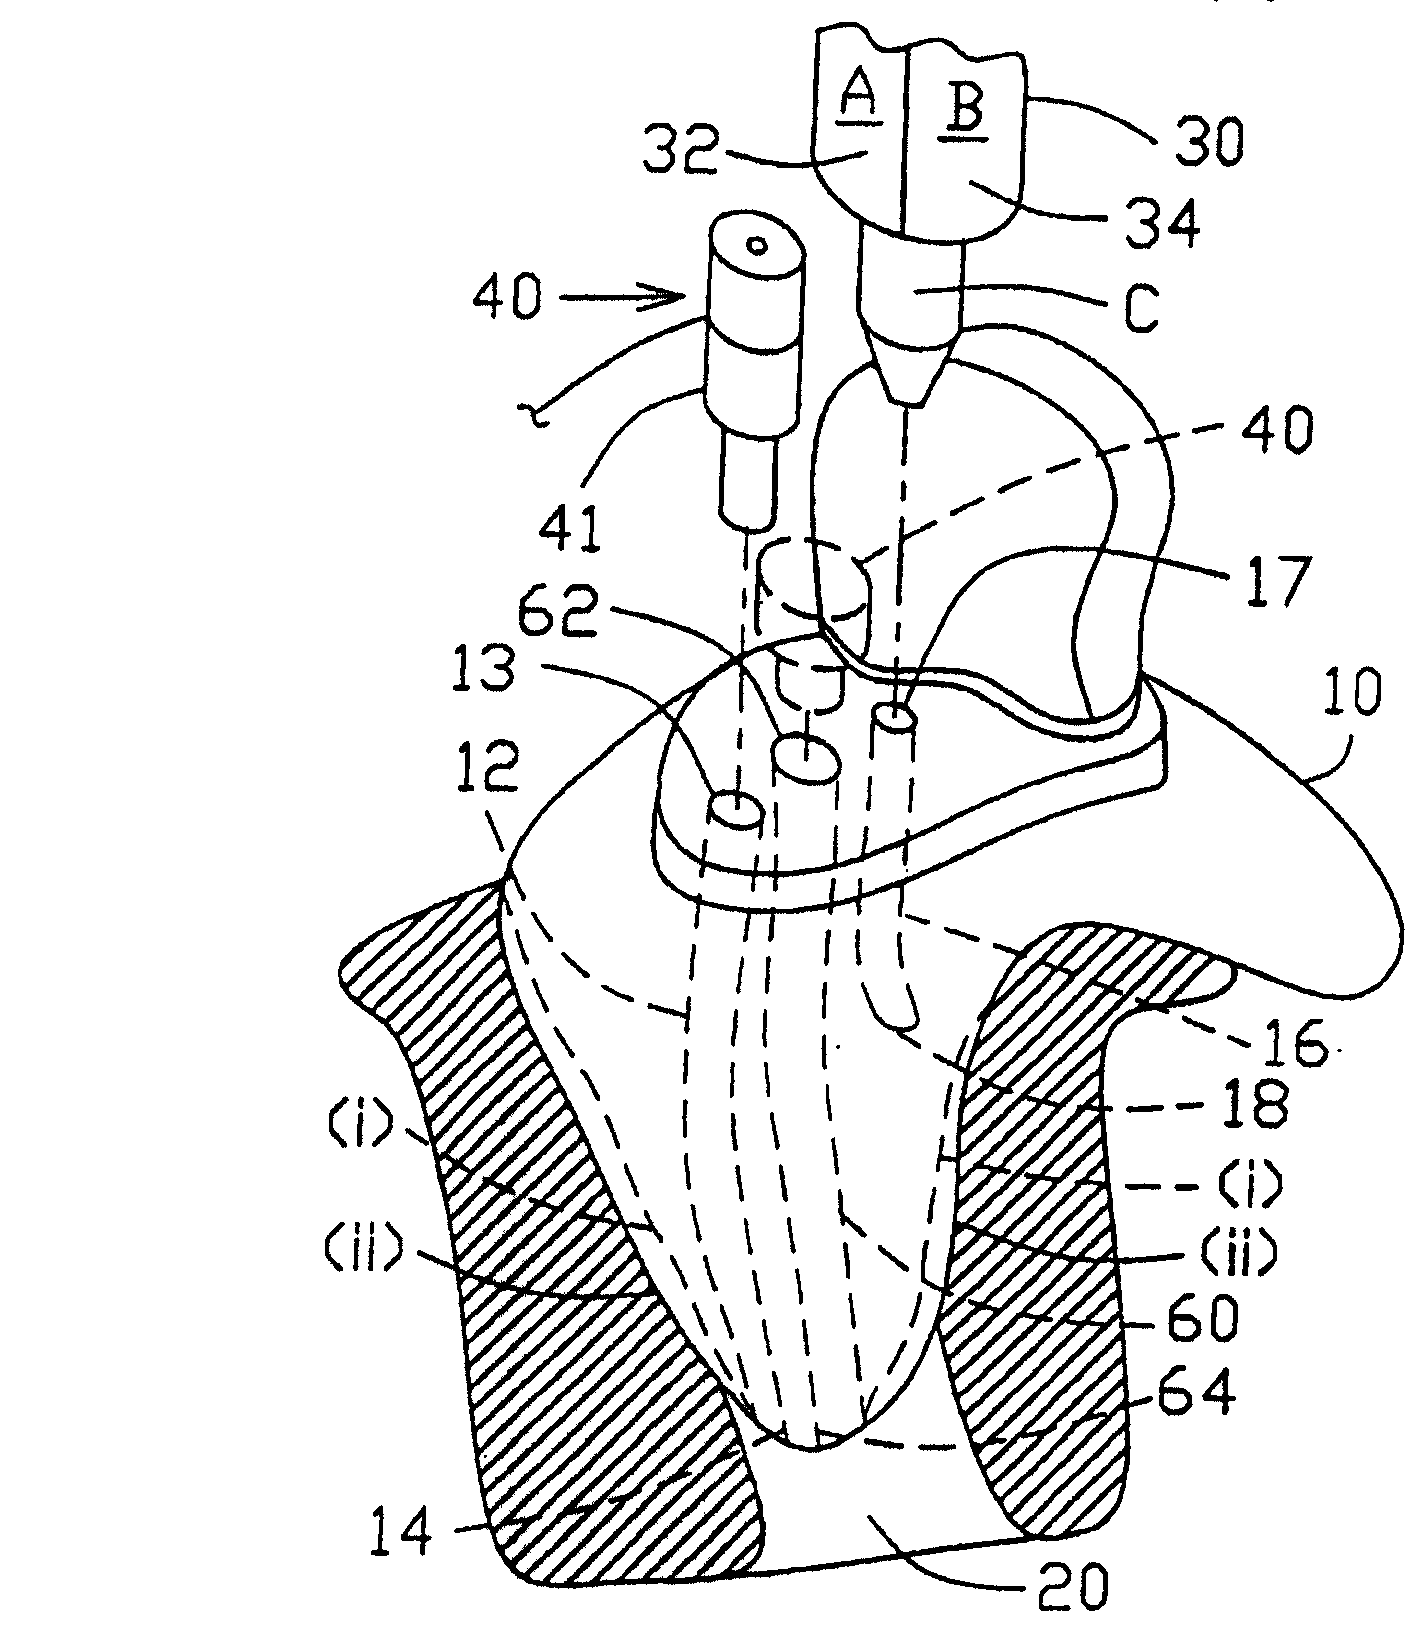 Method and apparatus for determining in situ the acoustic seal provided by an in-ear device